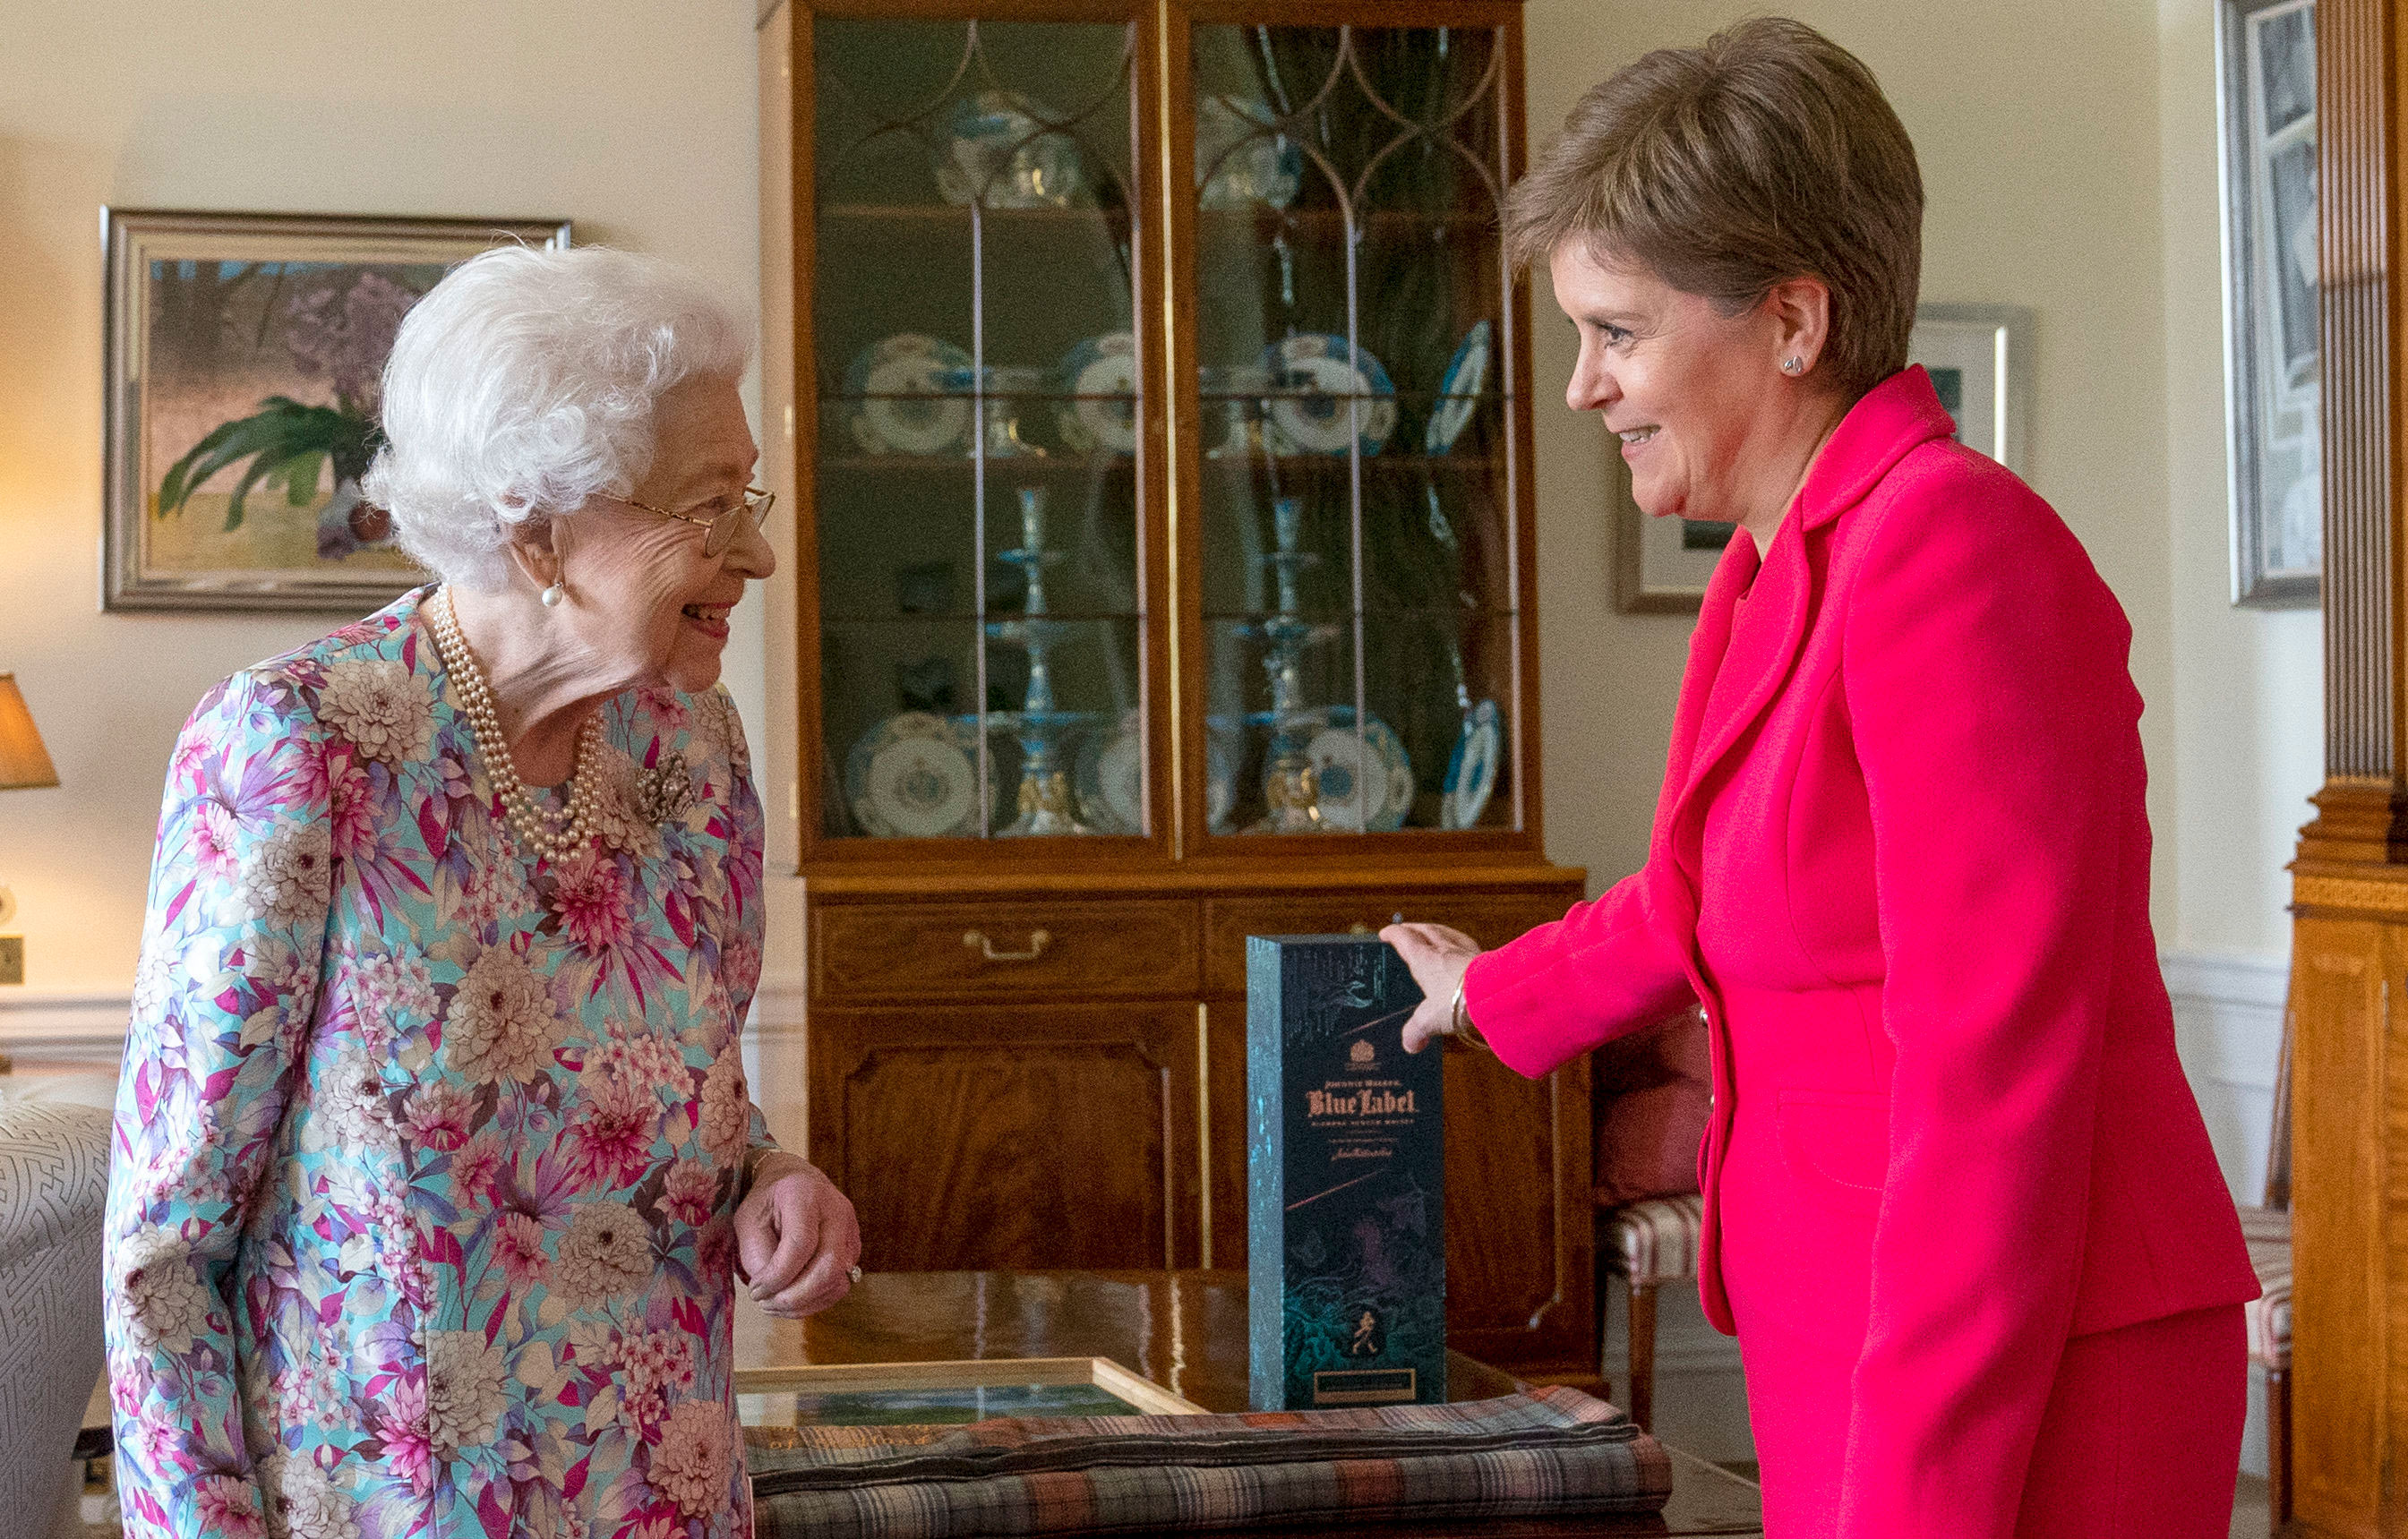 Queen Elizabeth II receives First Minister of Scotland Nicola Sturgeon at the Palace of Holyroodhouse in Edinburgh, Scotland, in June.